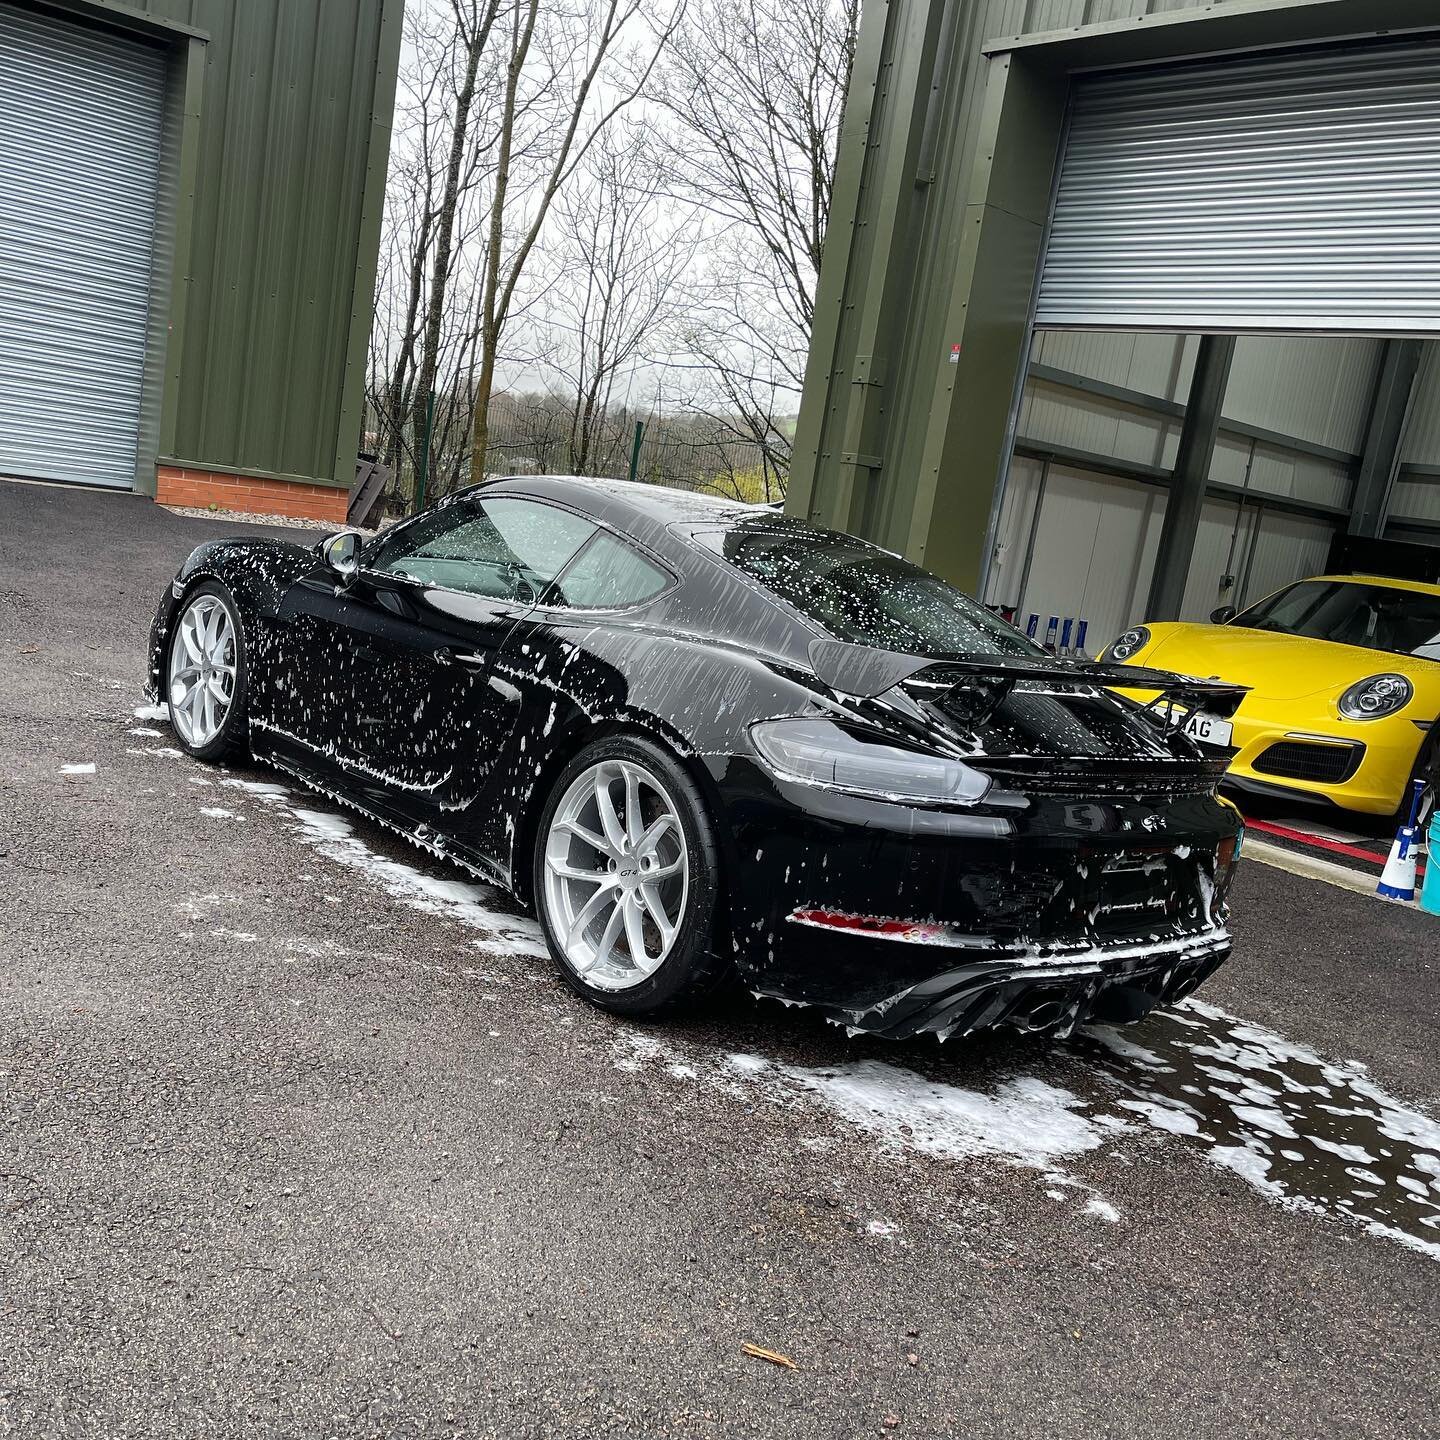 Welcome to your local Porsche Centre&hellip; dealing only in the protection of your investment with @xpel_uk @xpel 🟡⚫️

#porsche #porscheGT4 #luxurycars #luxurylifestyle #carsofinstagram #instacar #carporn #xpel #xpelppf #xpelultimateplus #paintprot